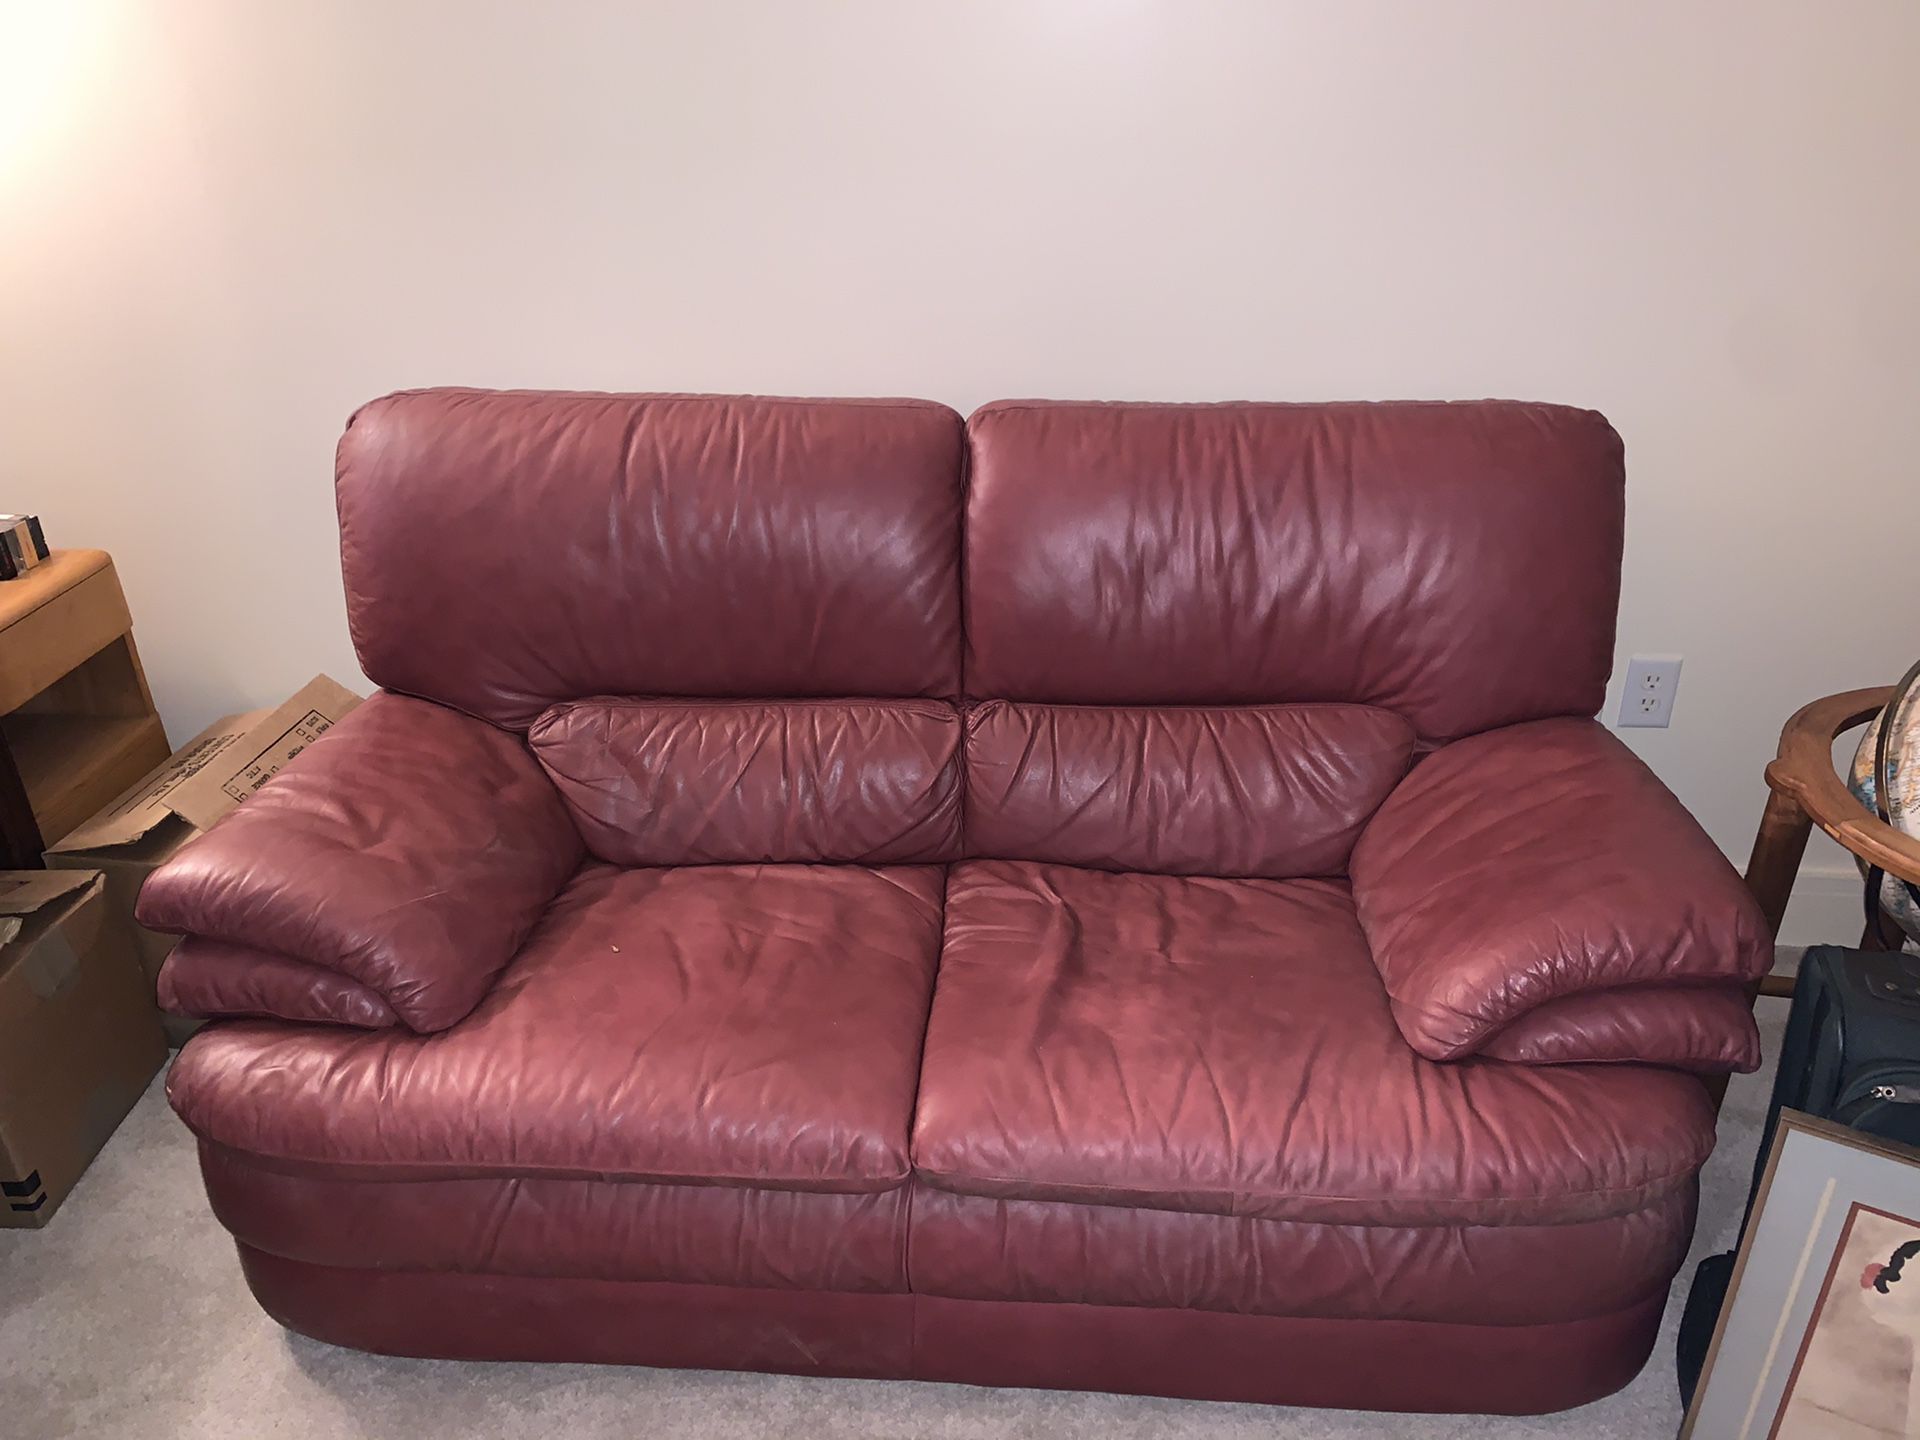 Leather couch, free to first person that wants it. Length 64; width 32; height 36